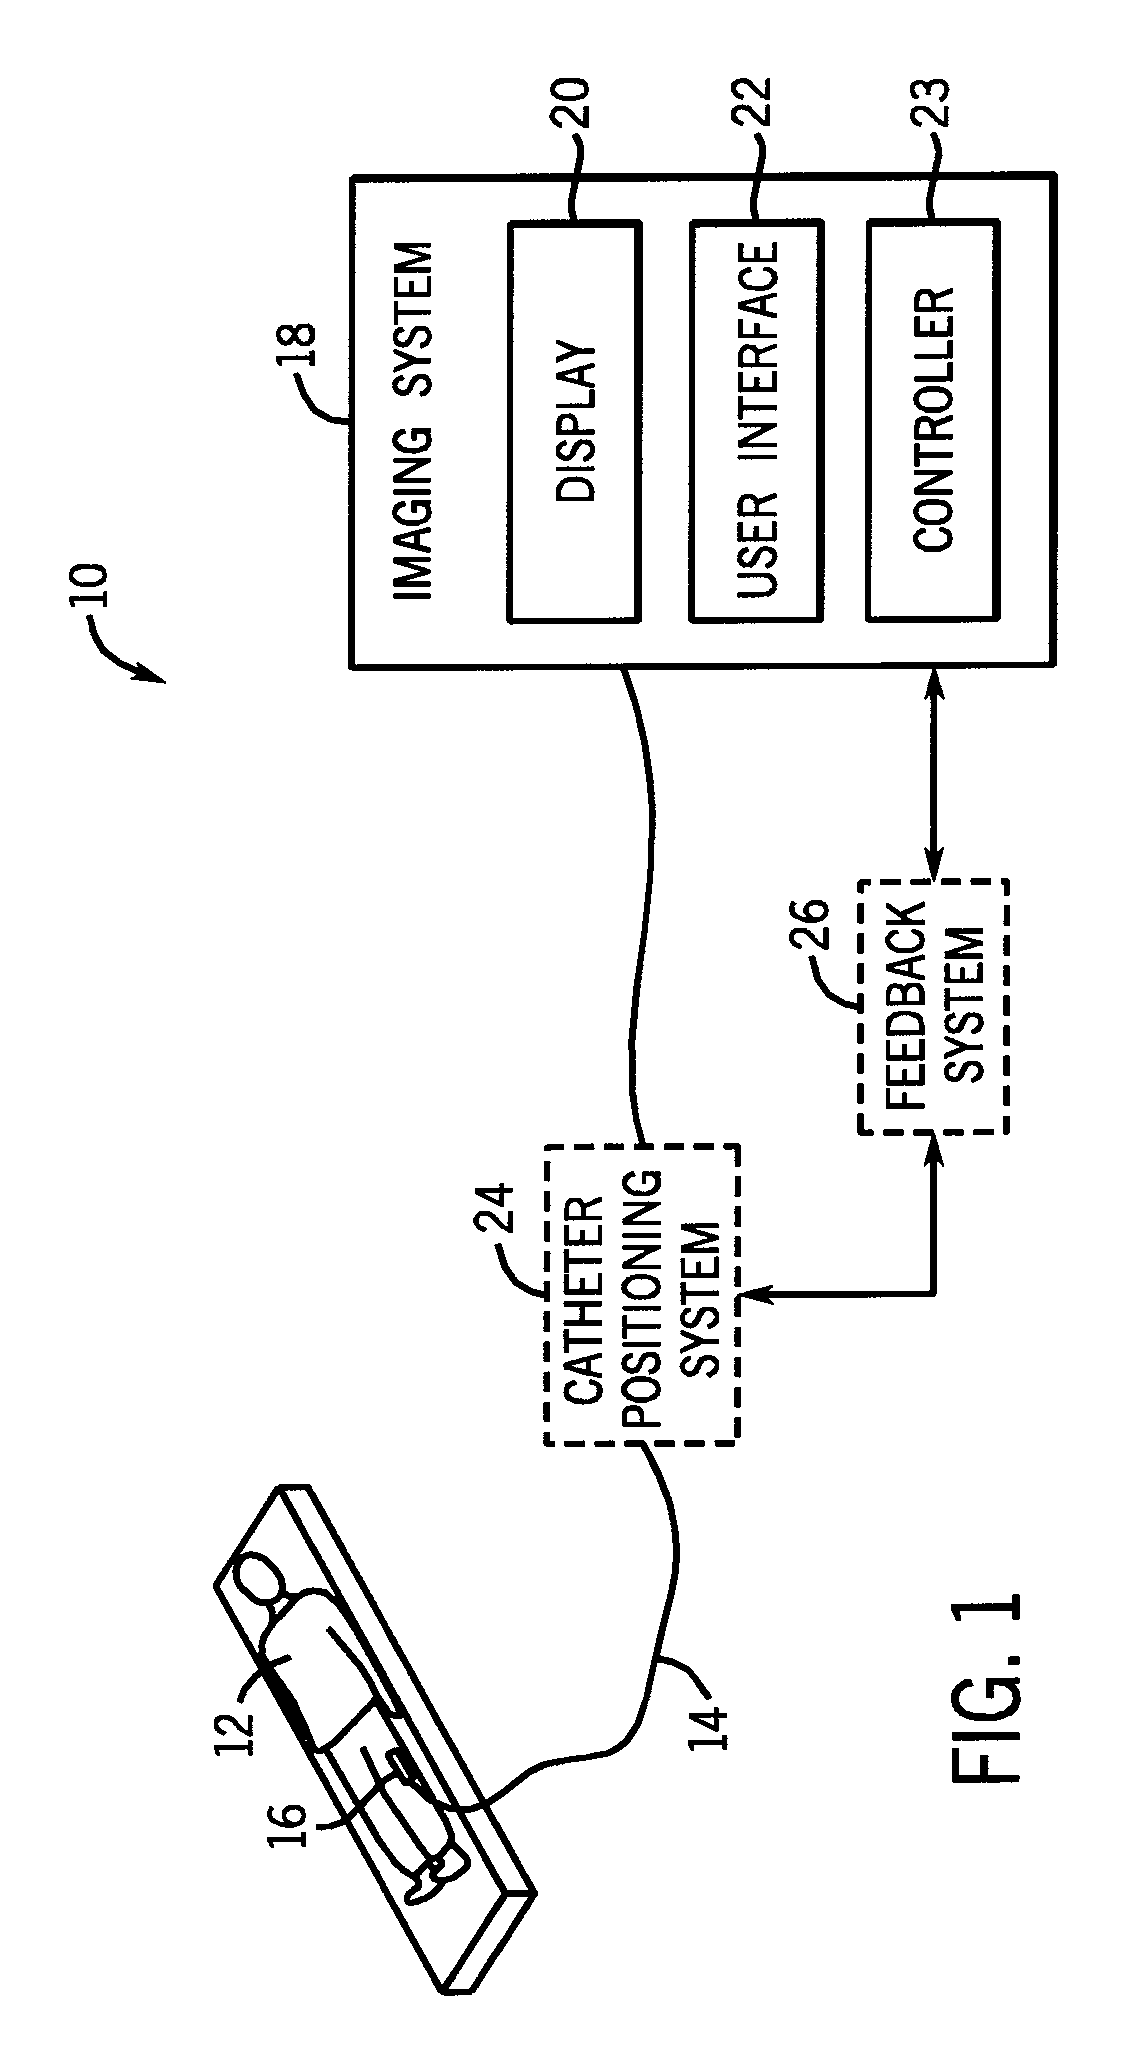 Ablation array having independently activated ablation elements